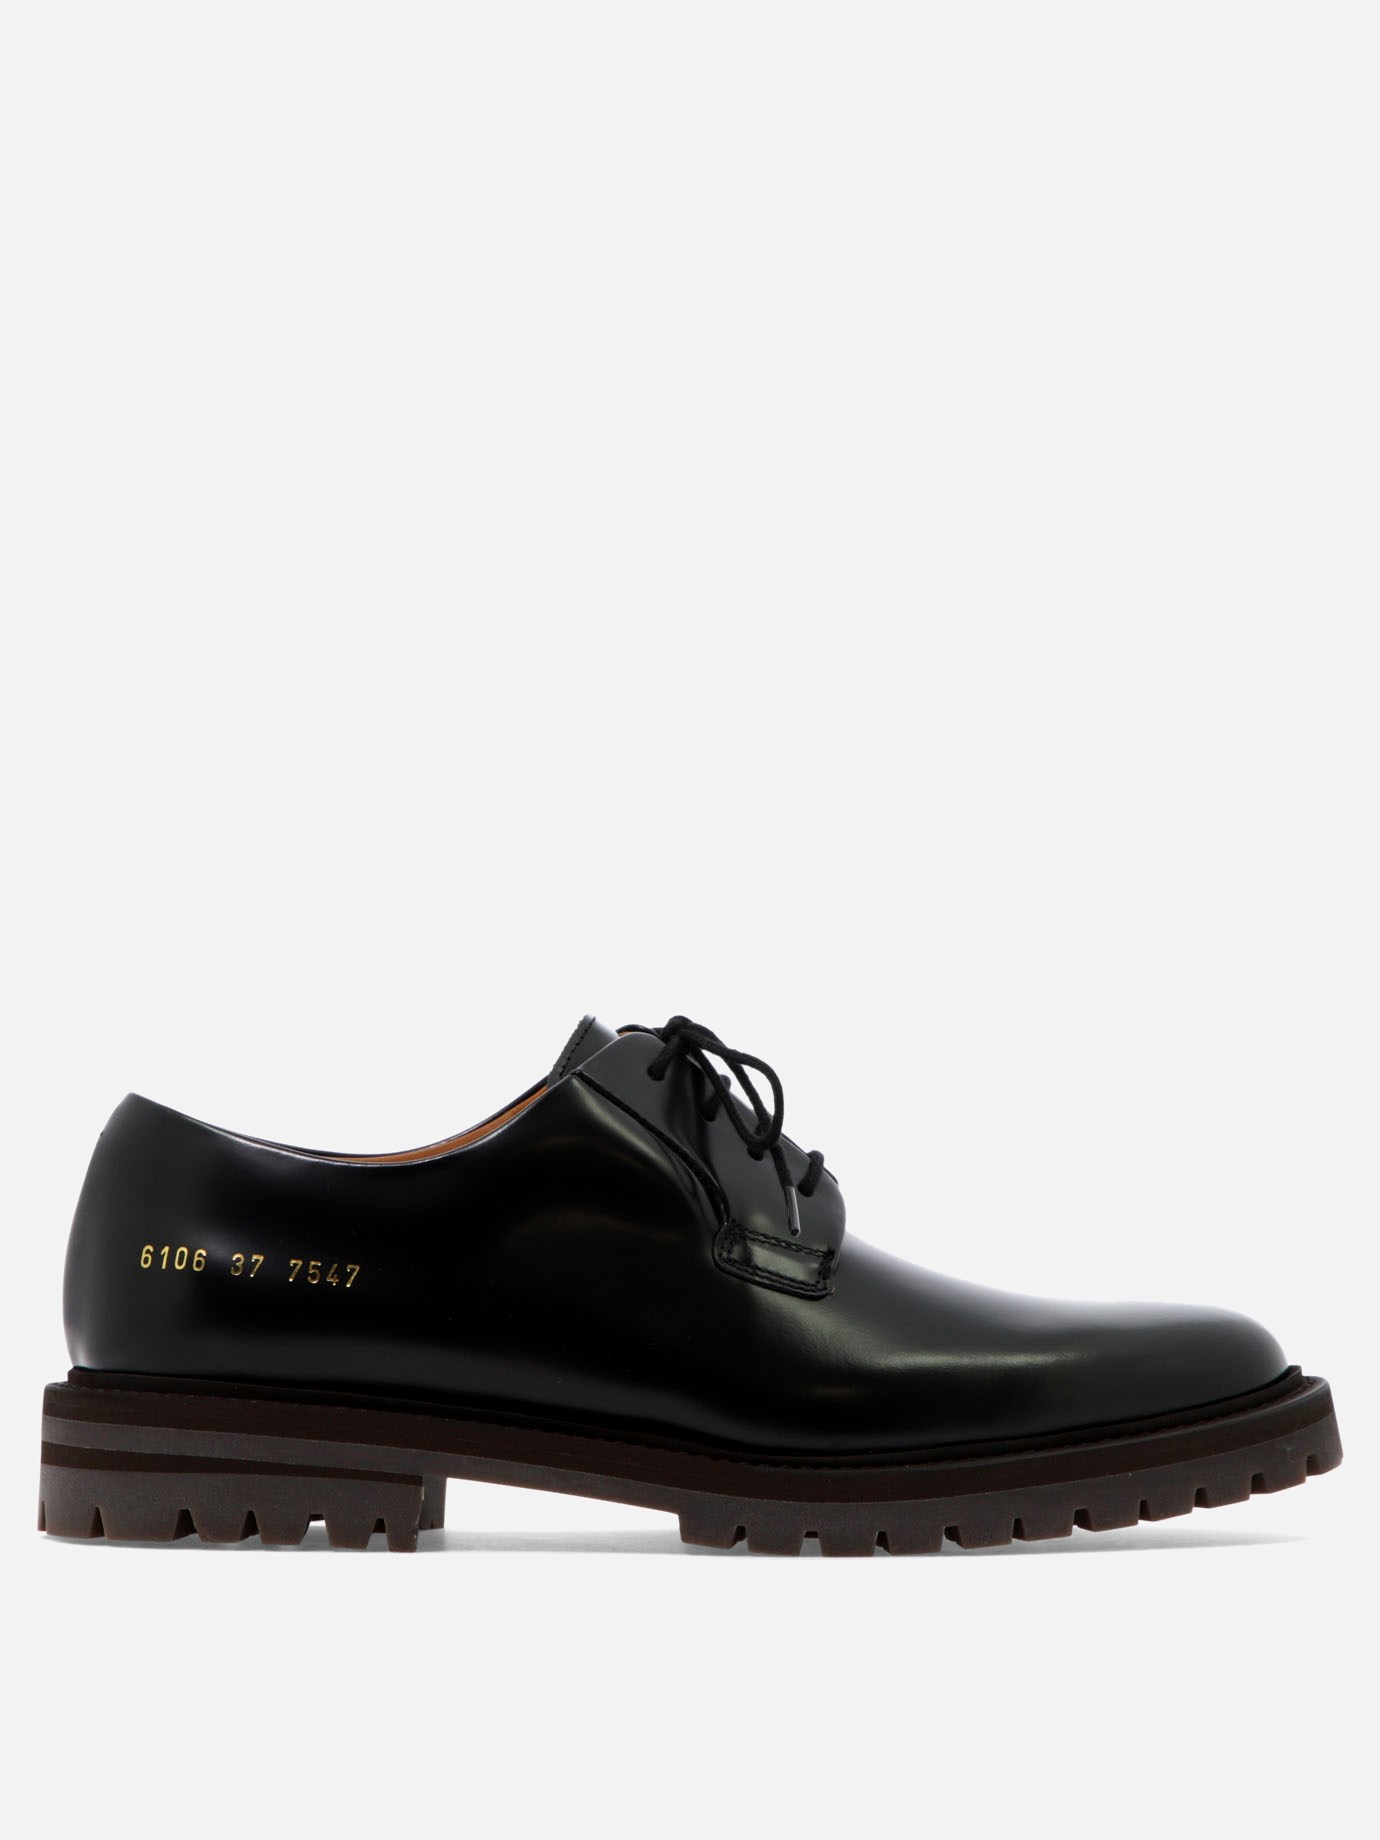  Derby  lace-up shoesby Common Projects - 2